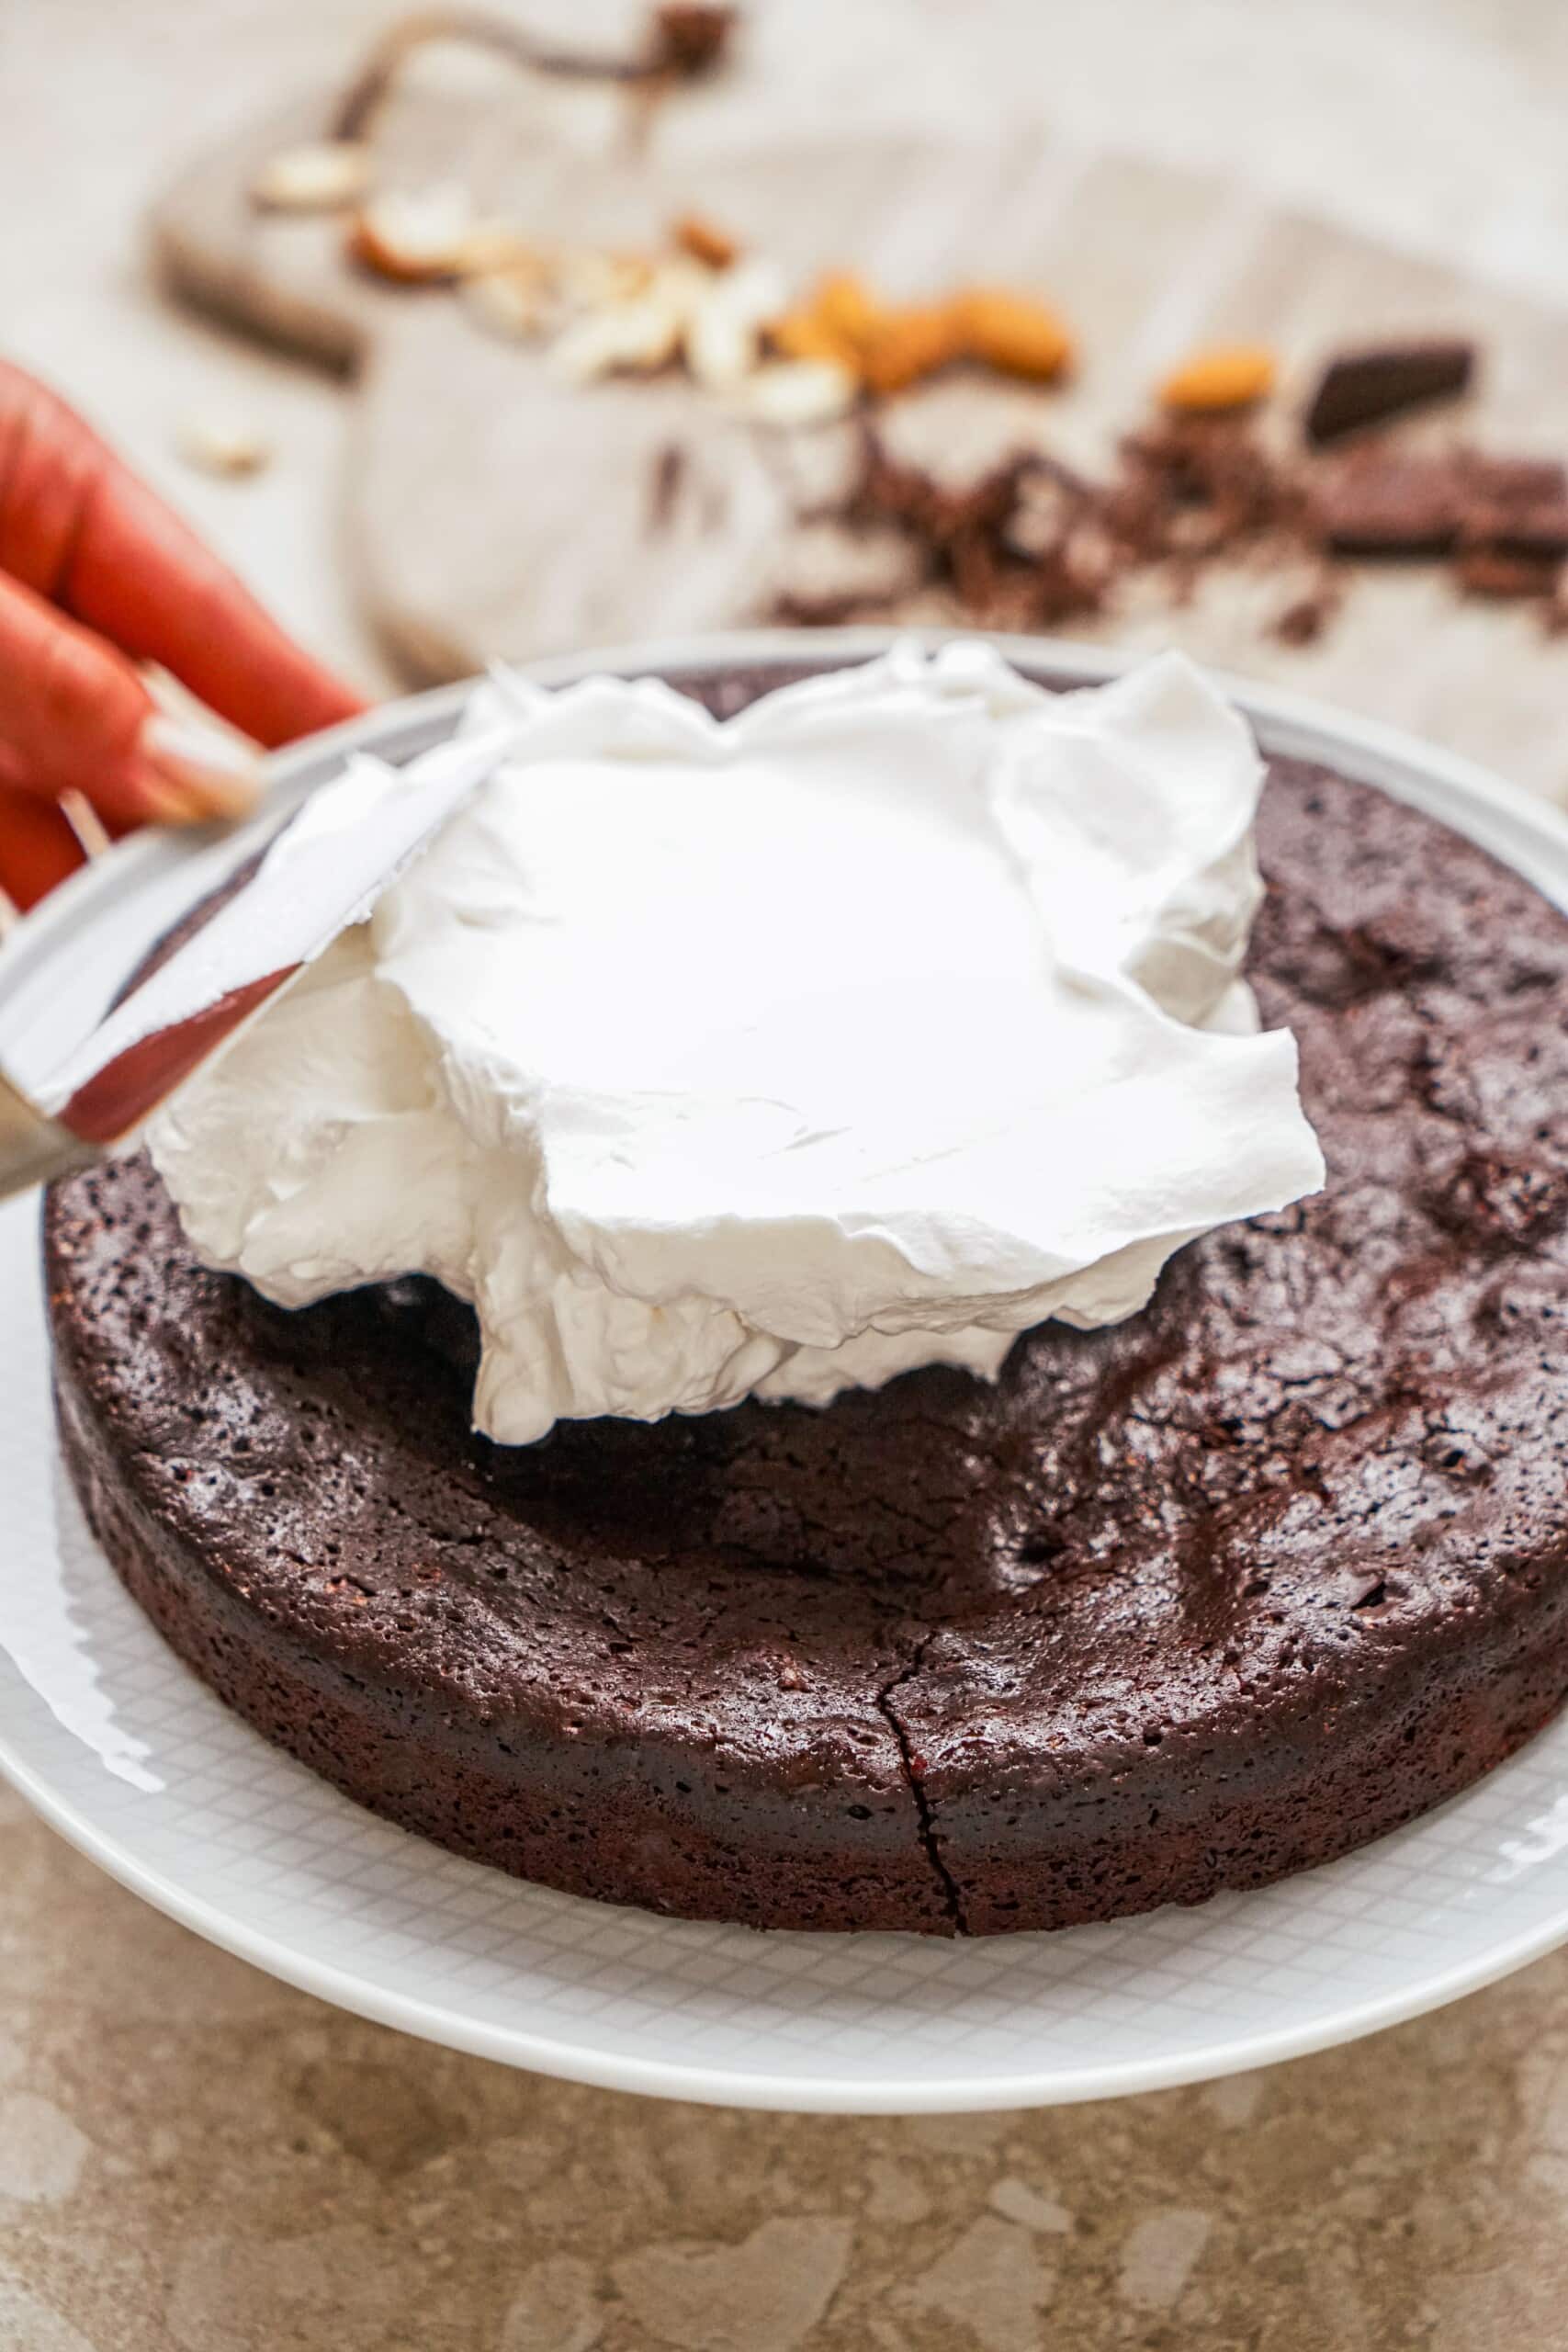 whipped cream being spread on cake